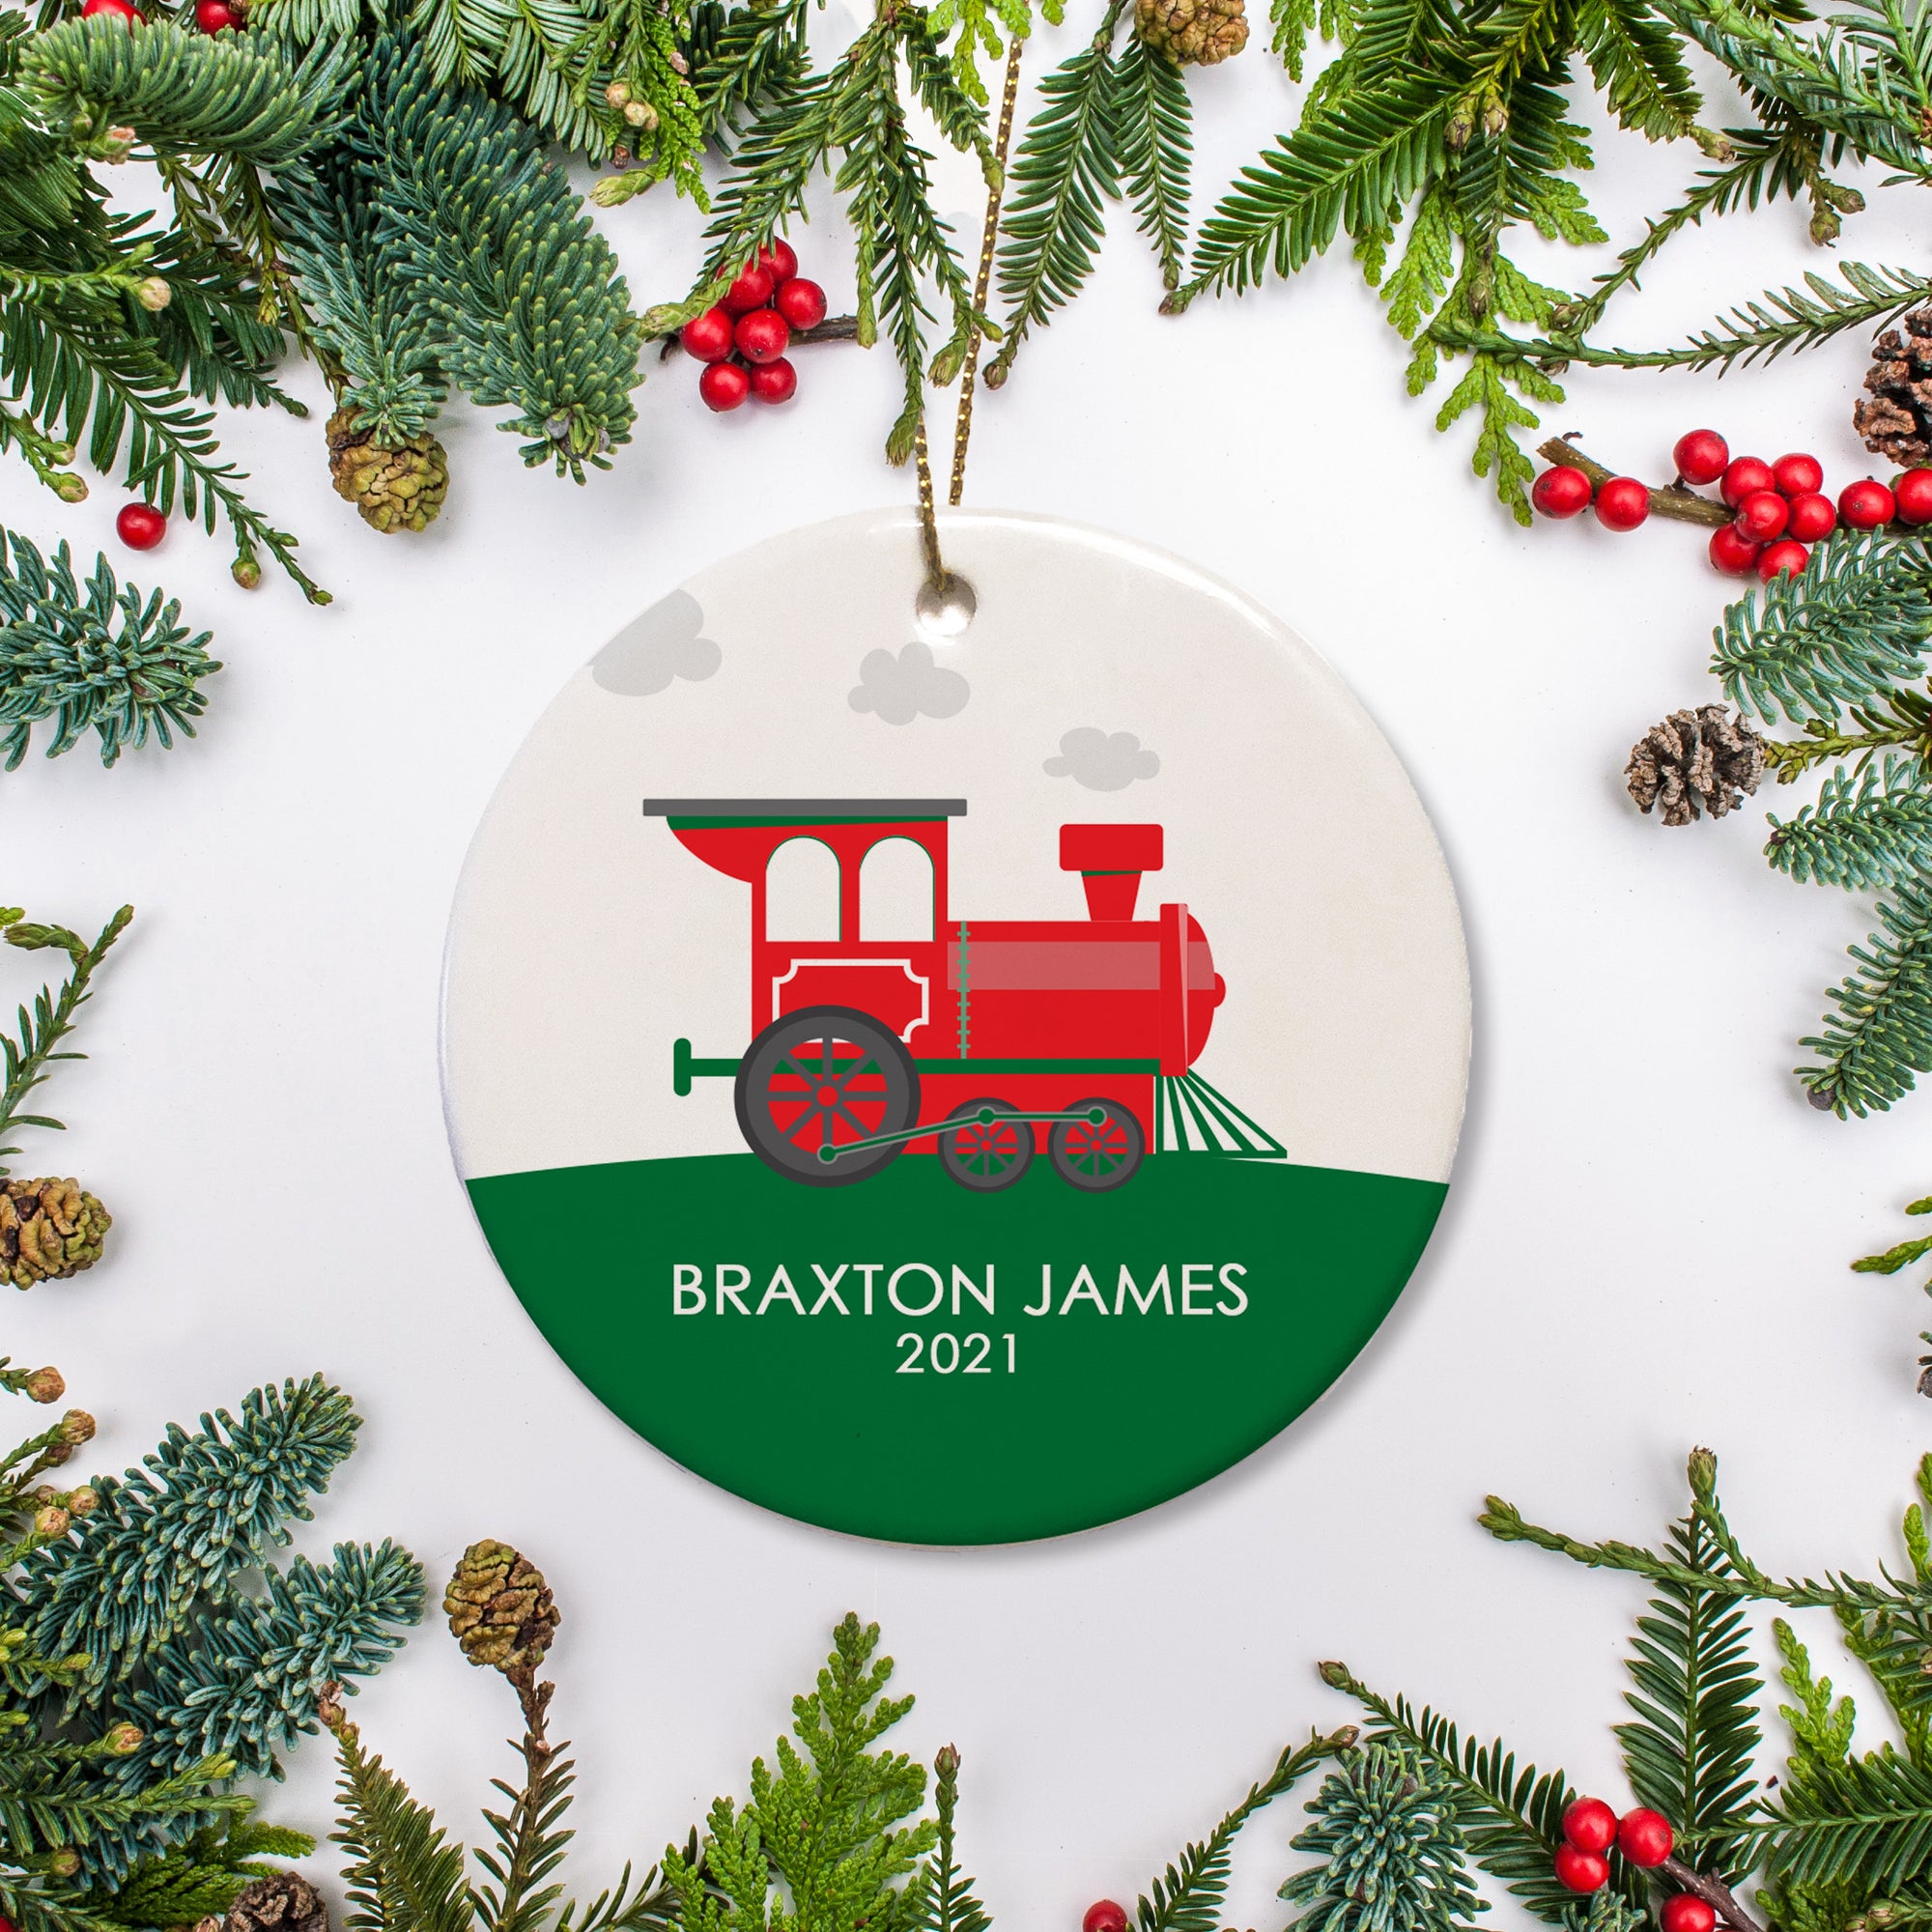 Choo Choo Train Keepsake Personalized Christmas Ornament. Red and green train on a green hill. Name and year of your choice in white against the green back ground.| Pipsy.com